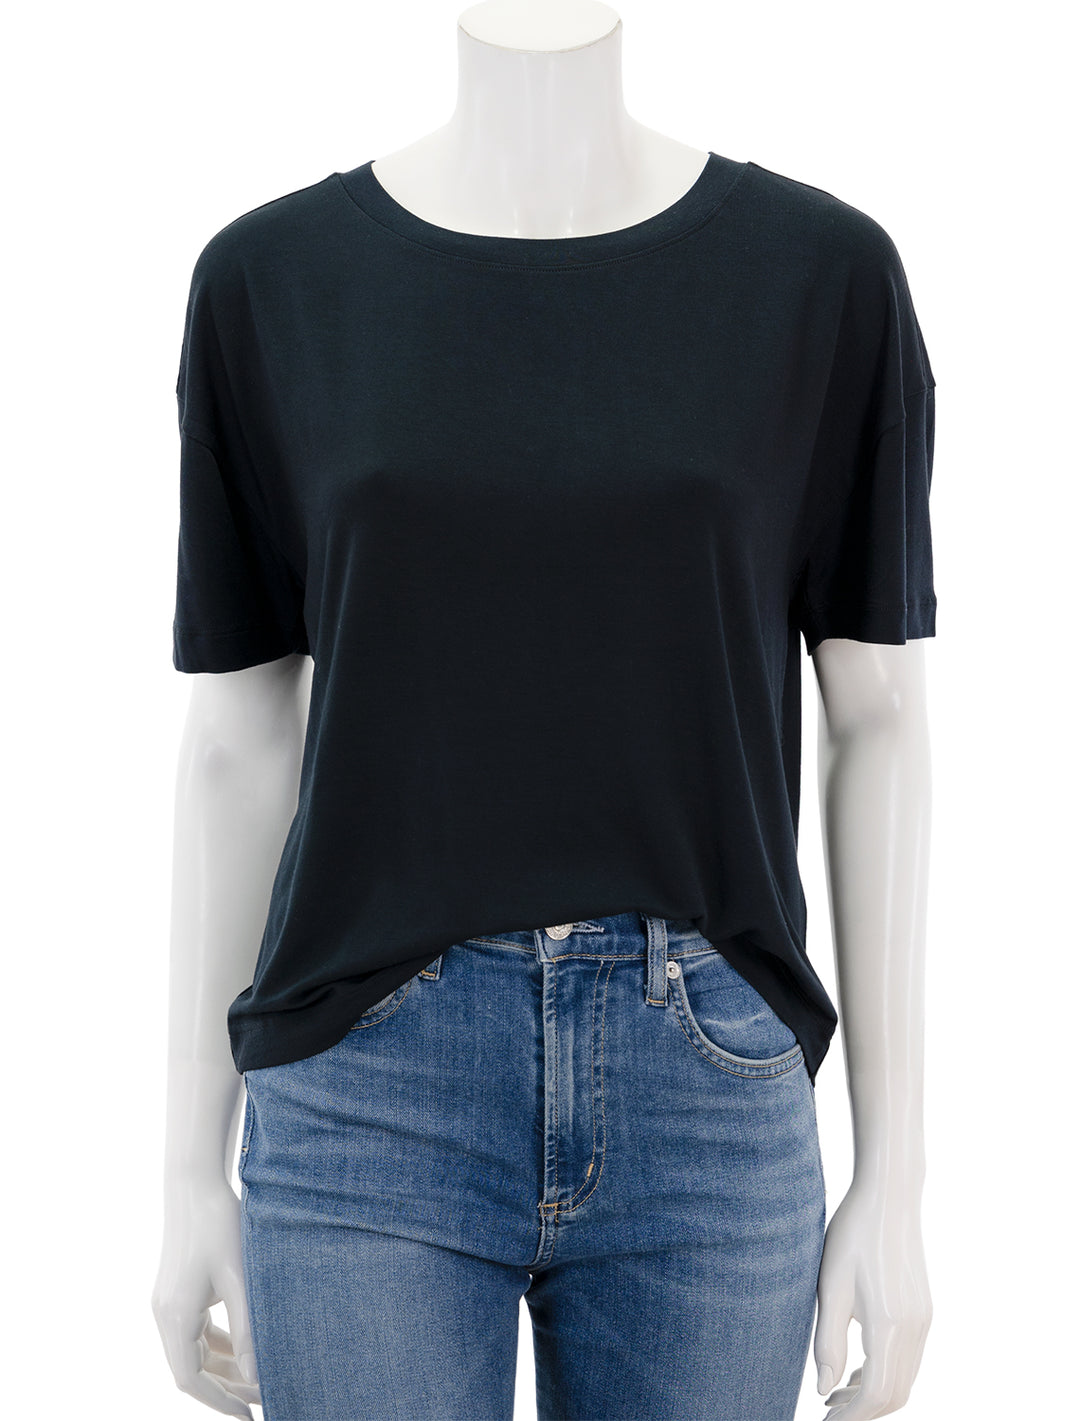 Front view of Eberjey's gisele everyday tshirt in black.